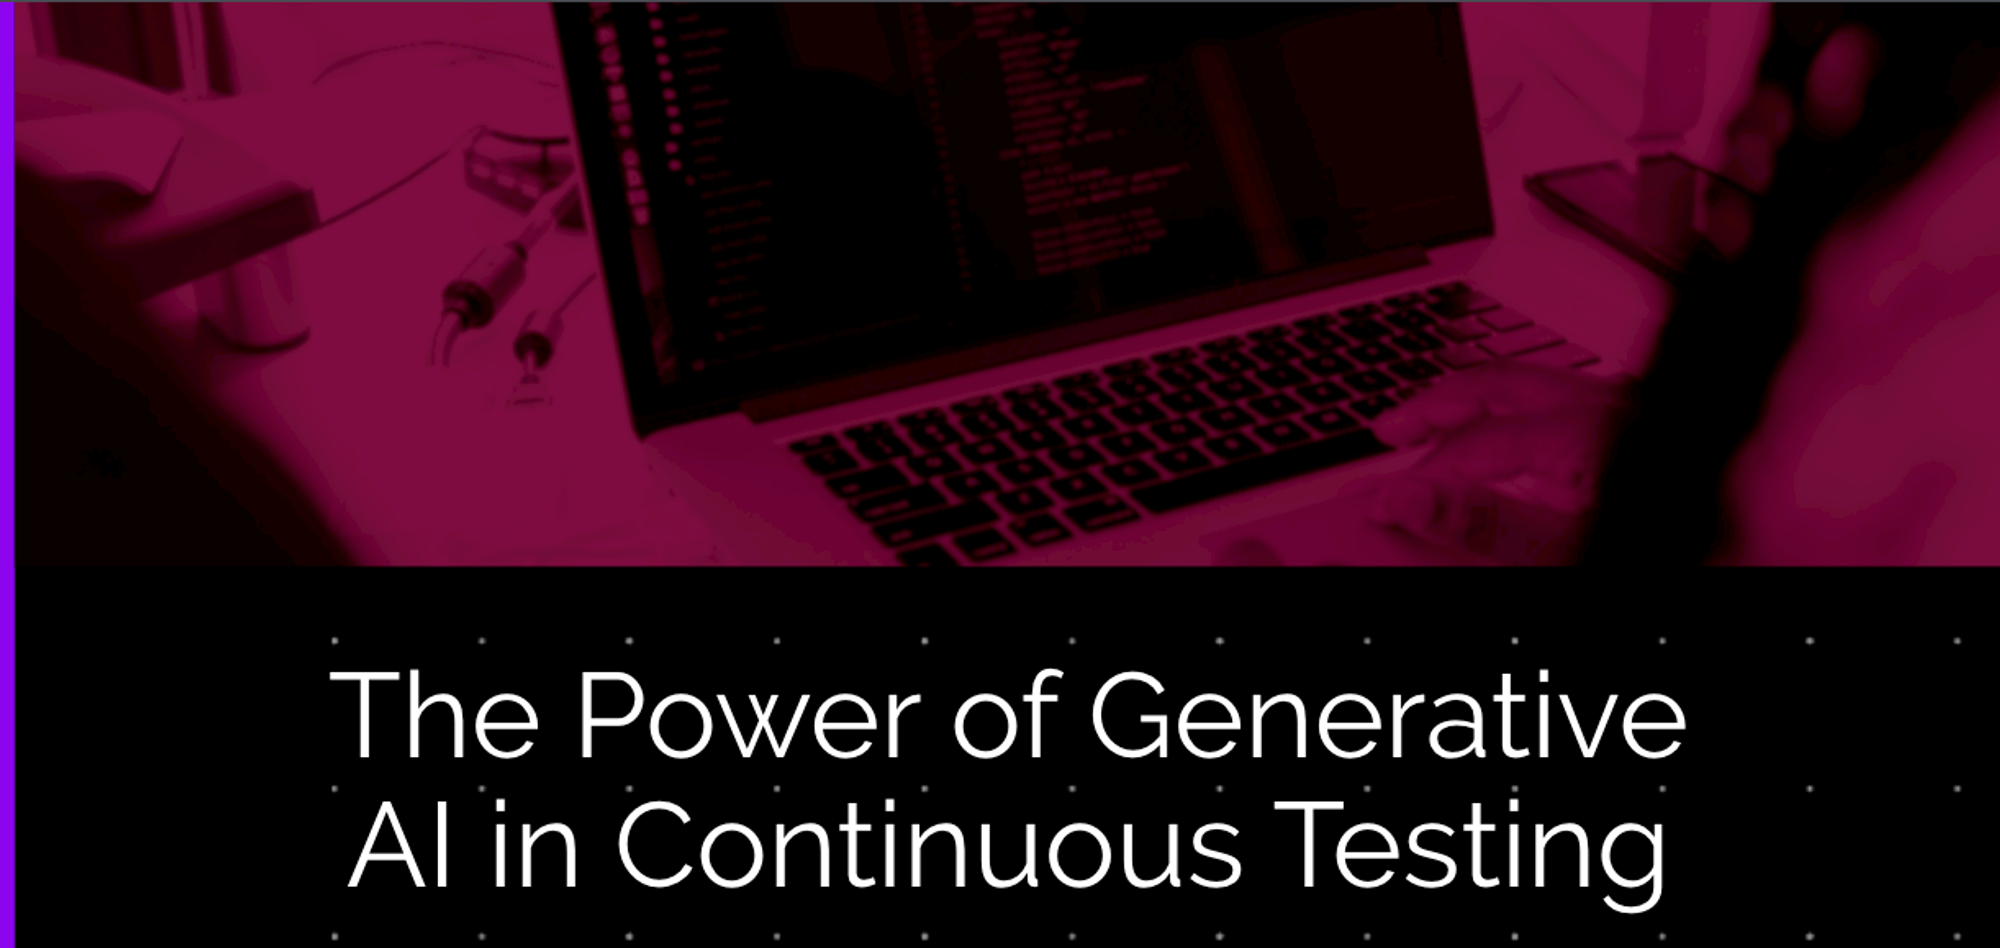 The Power of Generative AI in Continuous Testing